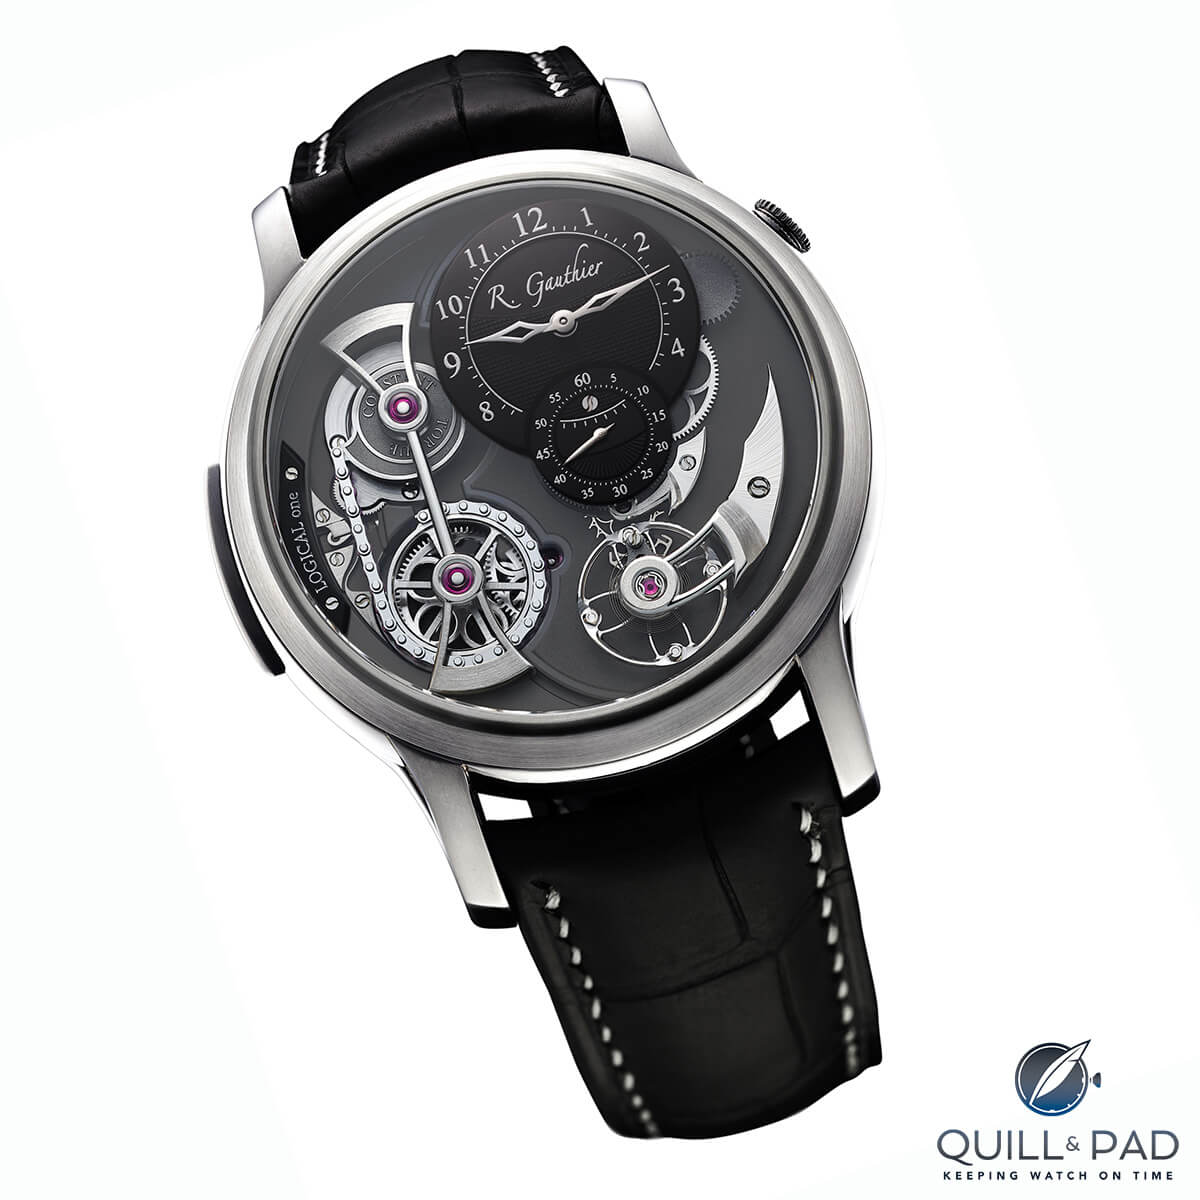 Romain Gauthier Logical One in natural titanium with black guilloche dials